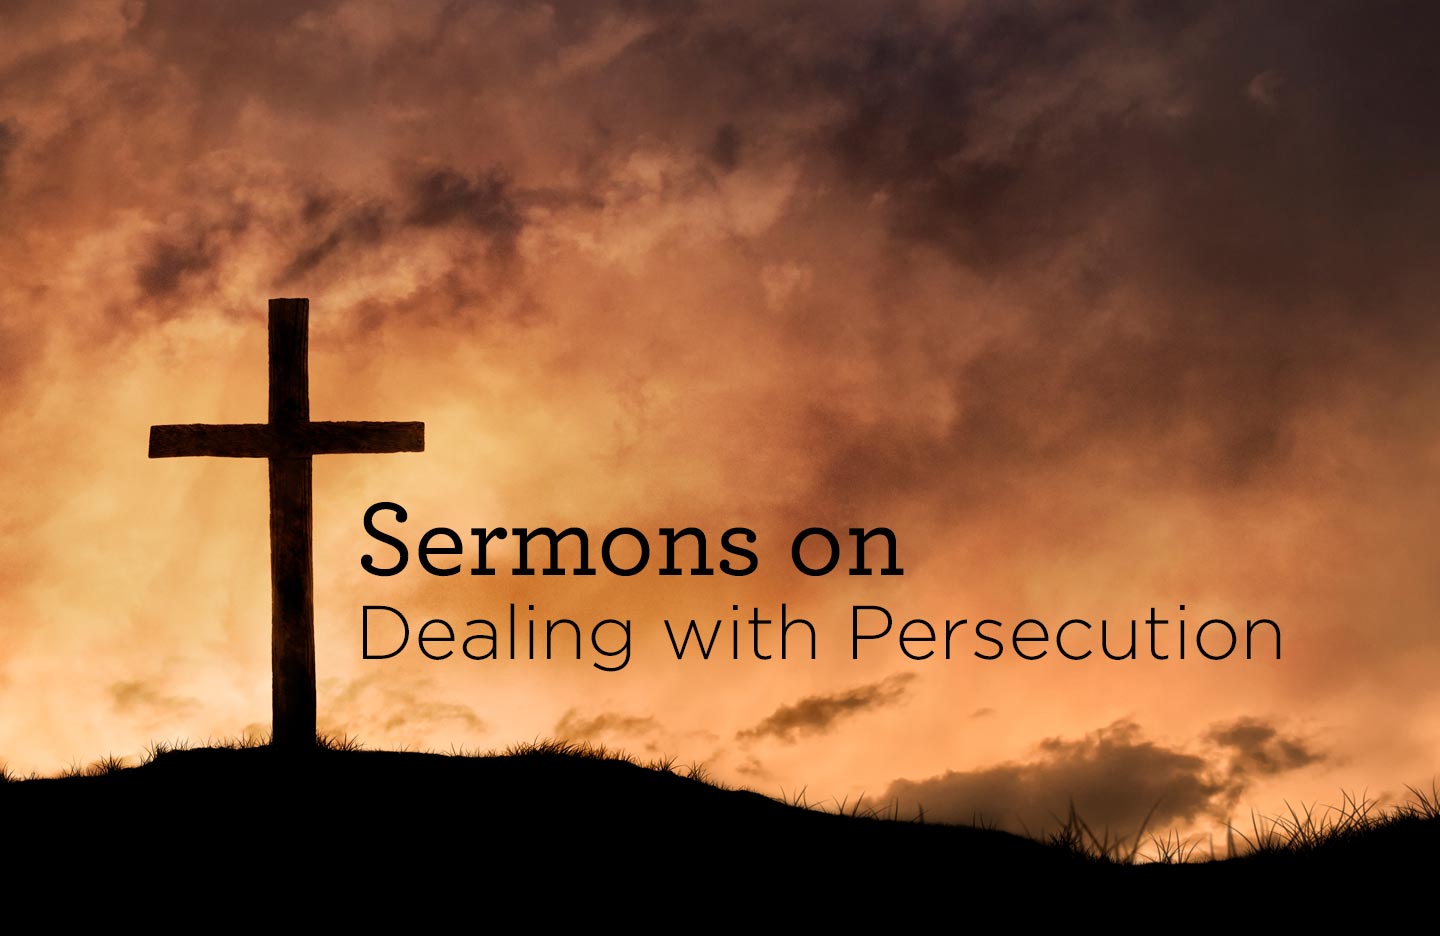 Sermons on Dealing with Persecution.jpg